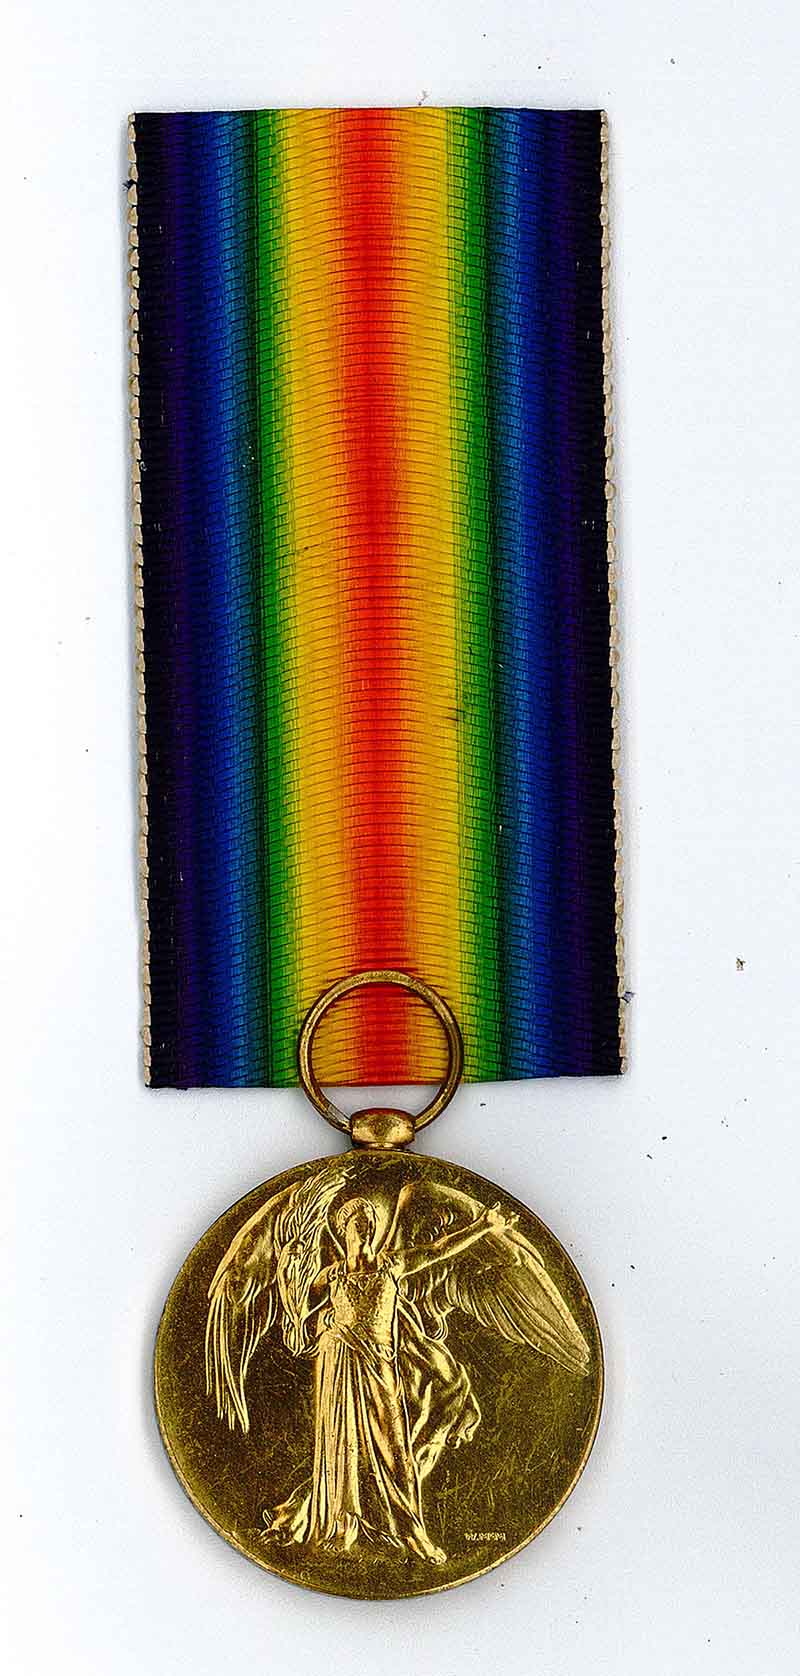 story-Noble-Panel-7-Victory-medal-other-side-1.jpg